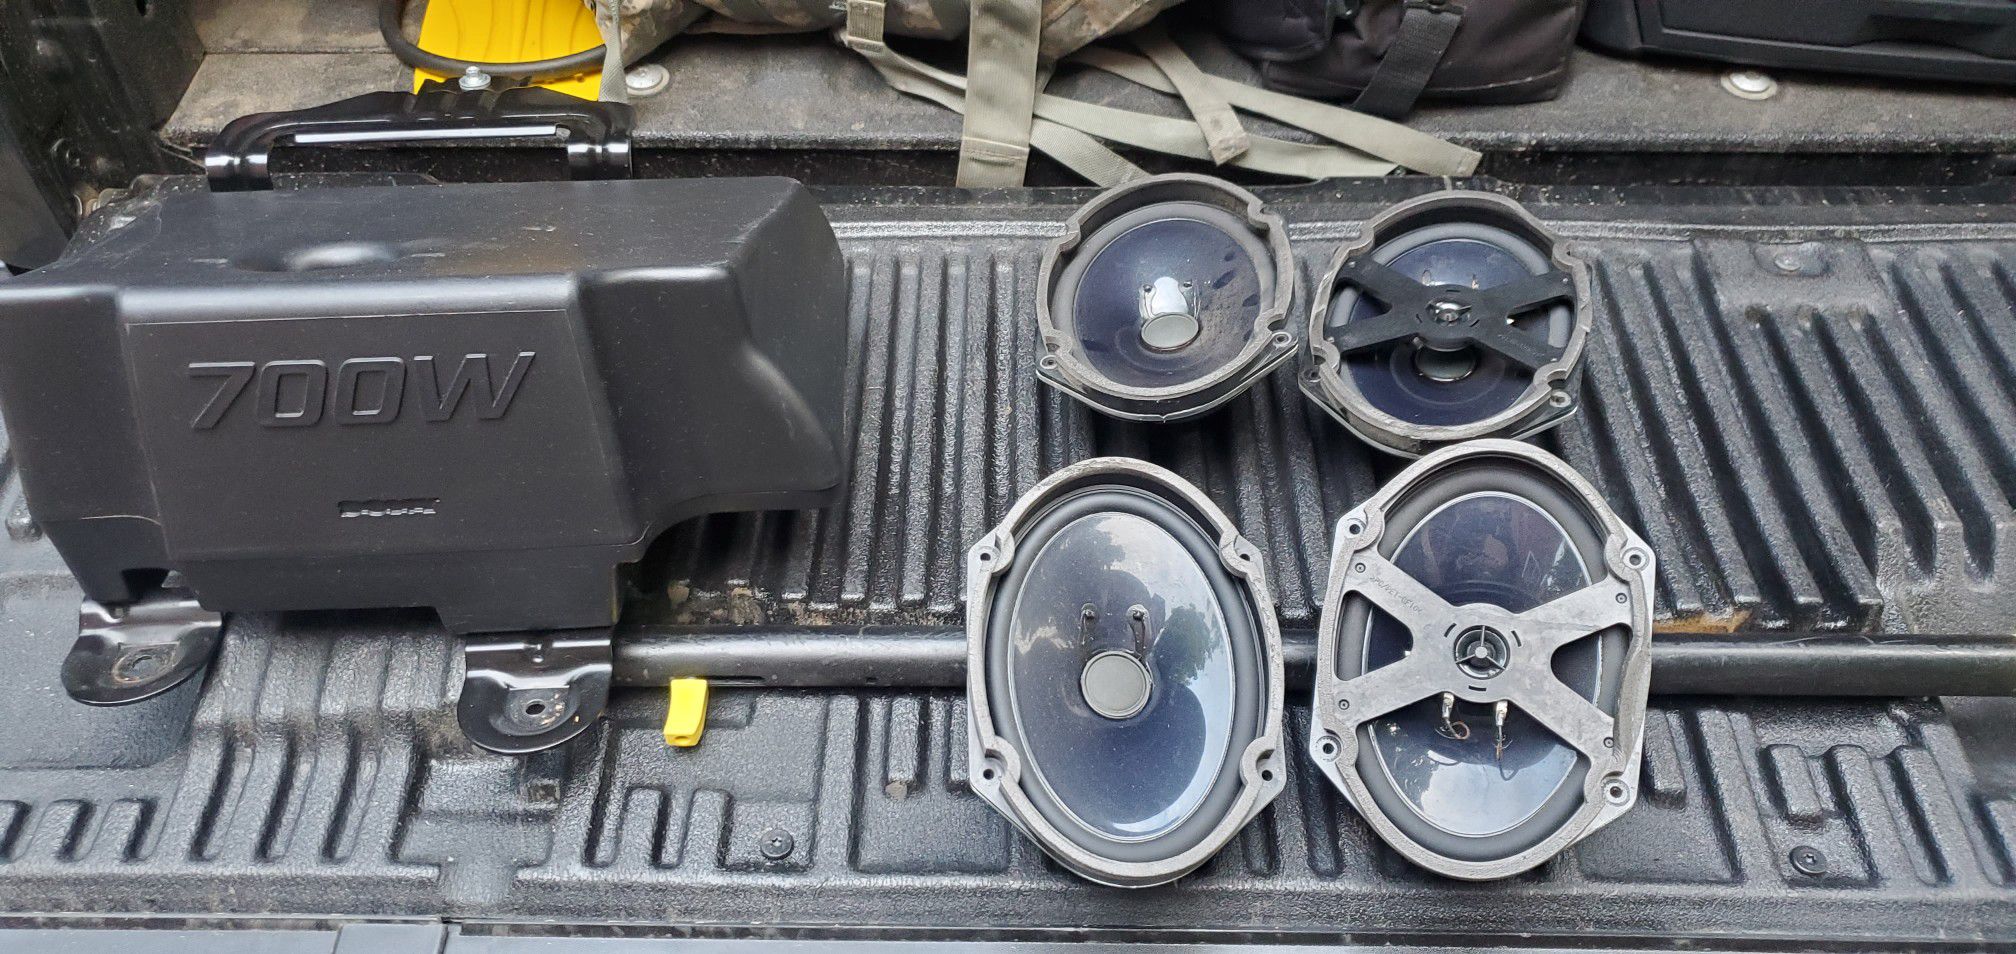 Upgraded SONY sound system for a f150